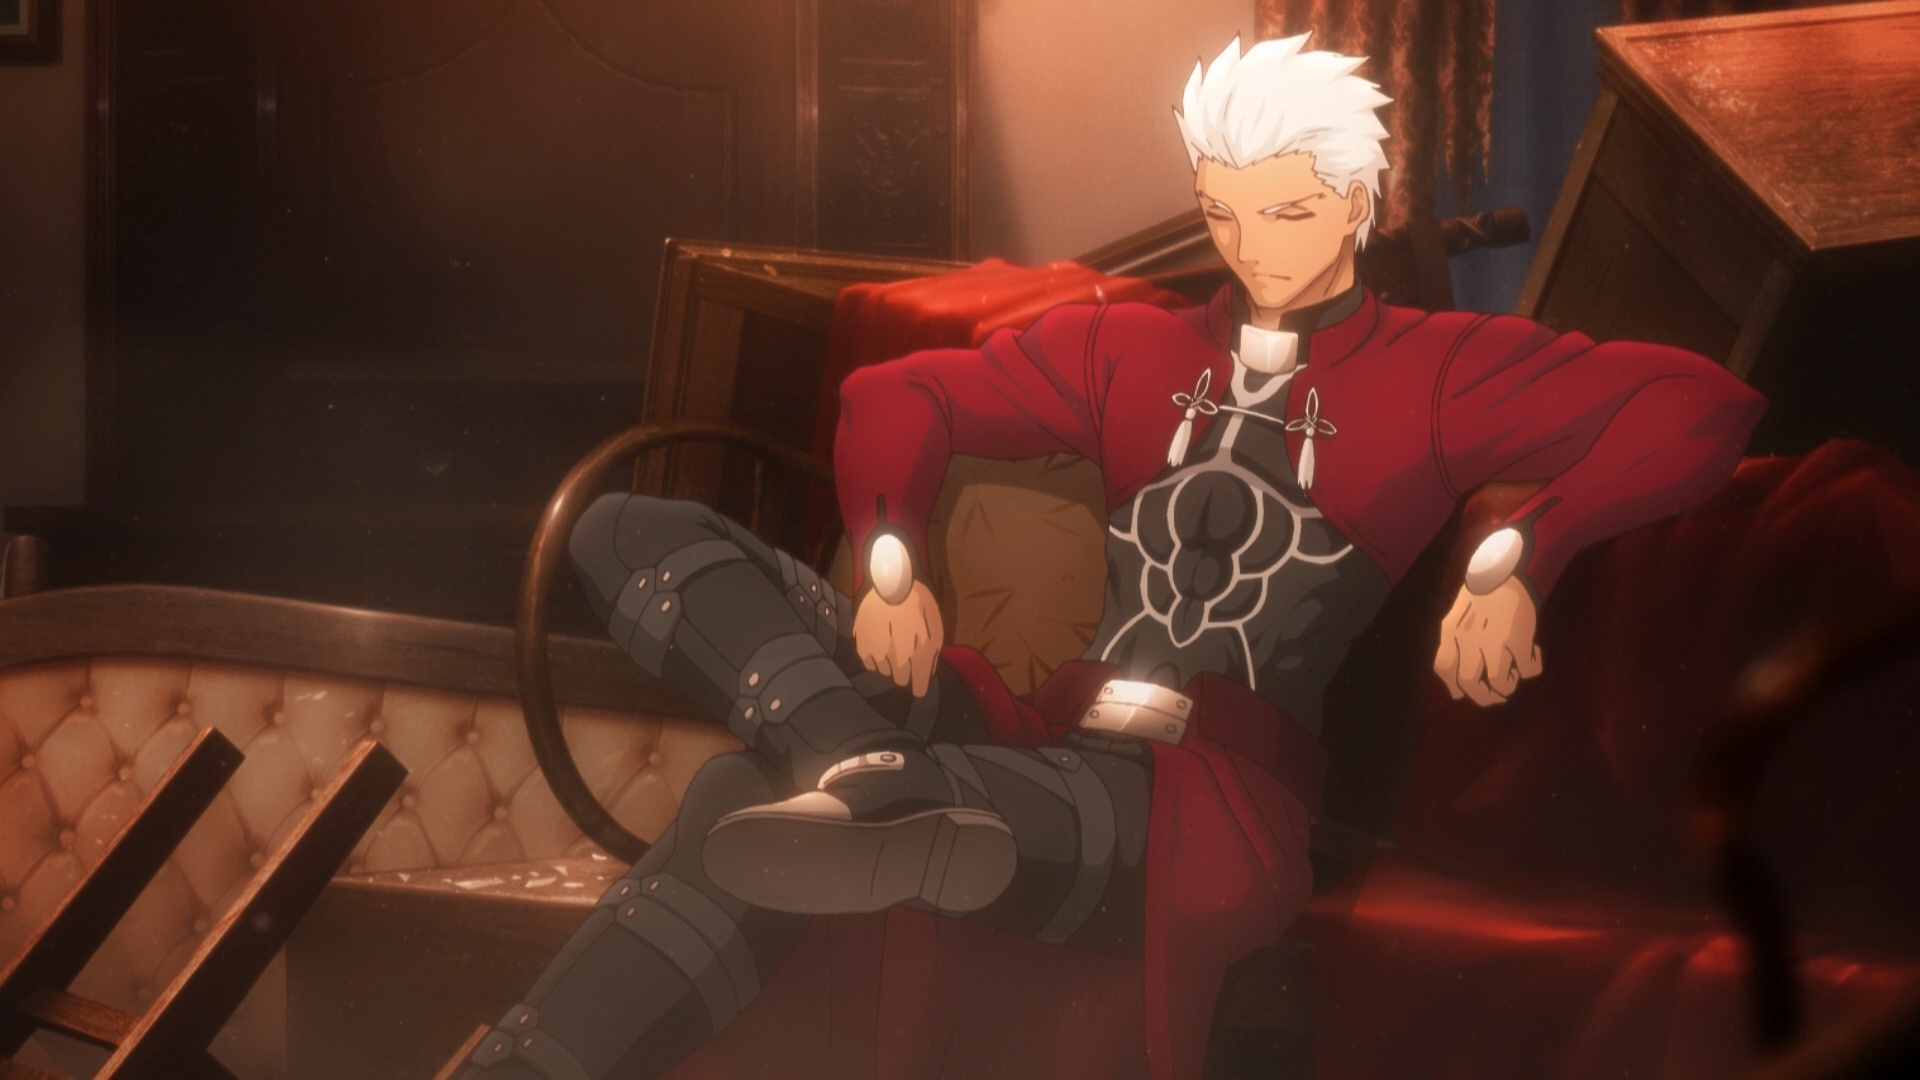 Fate/stay night: Unlimited Blade Works, Anime comparison, Critical analysis, Visual storytelling, 1920x1080 Full HD Desktop